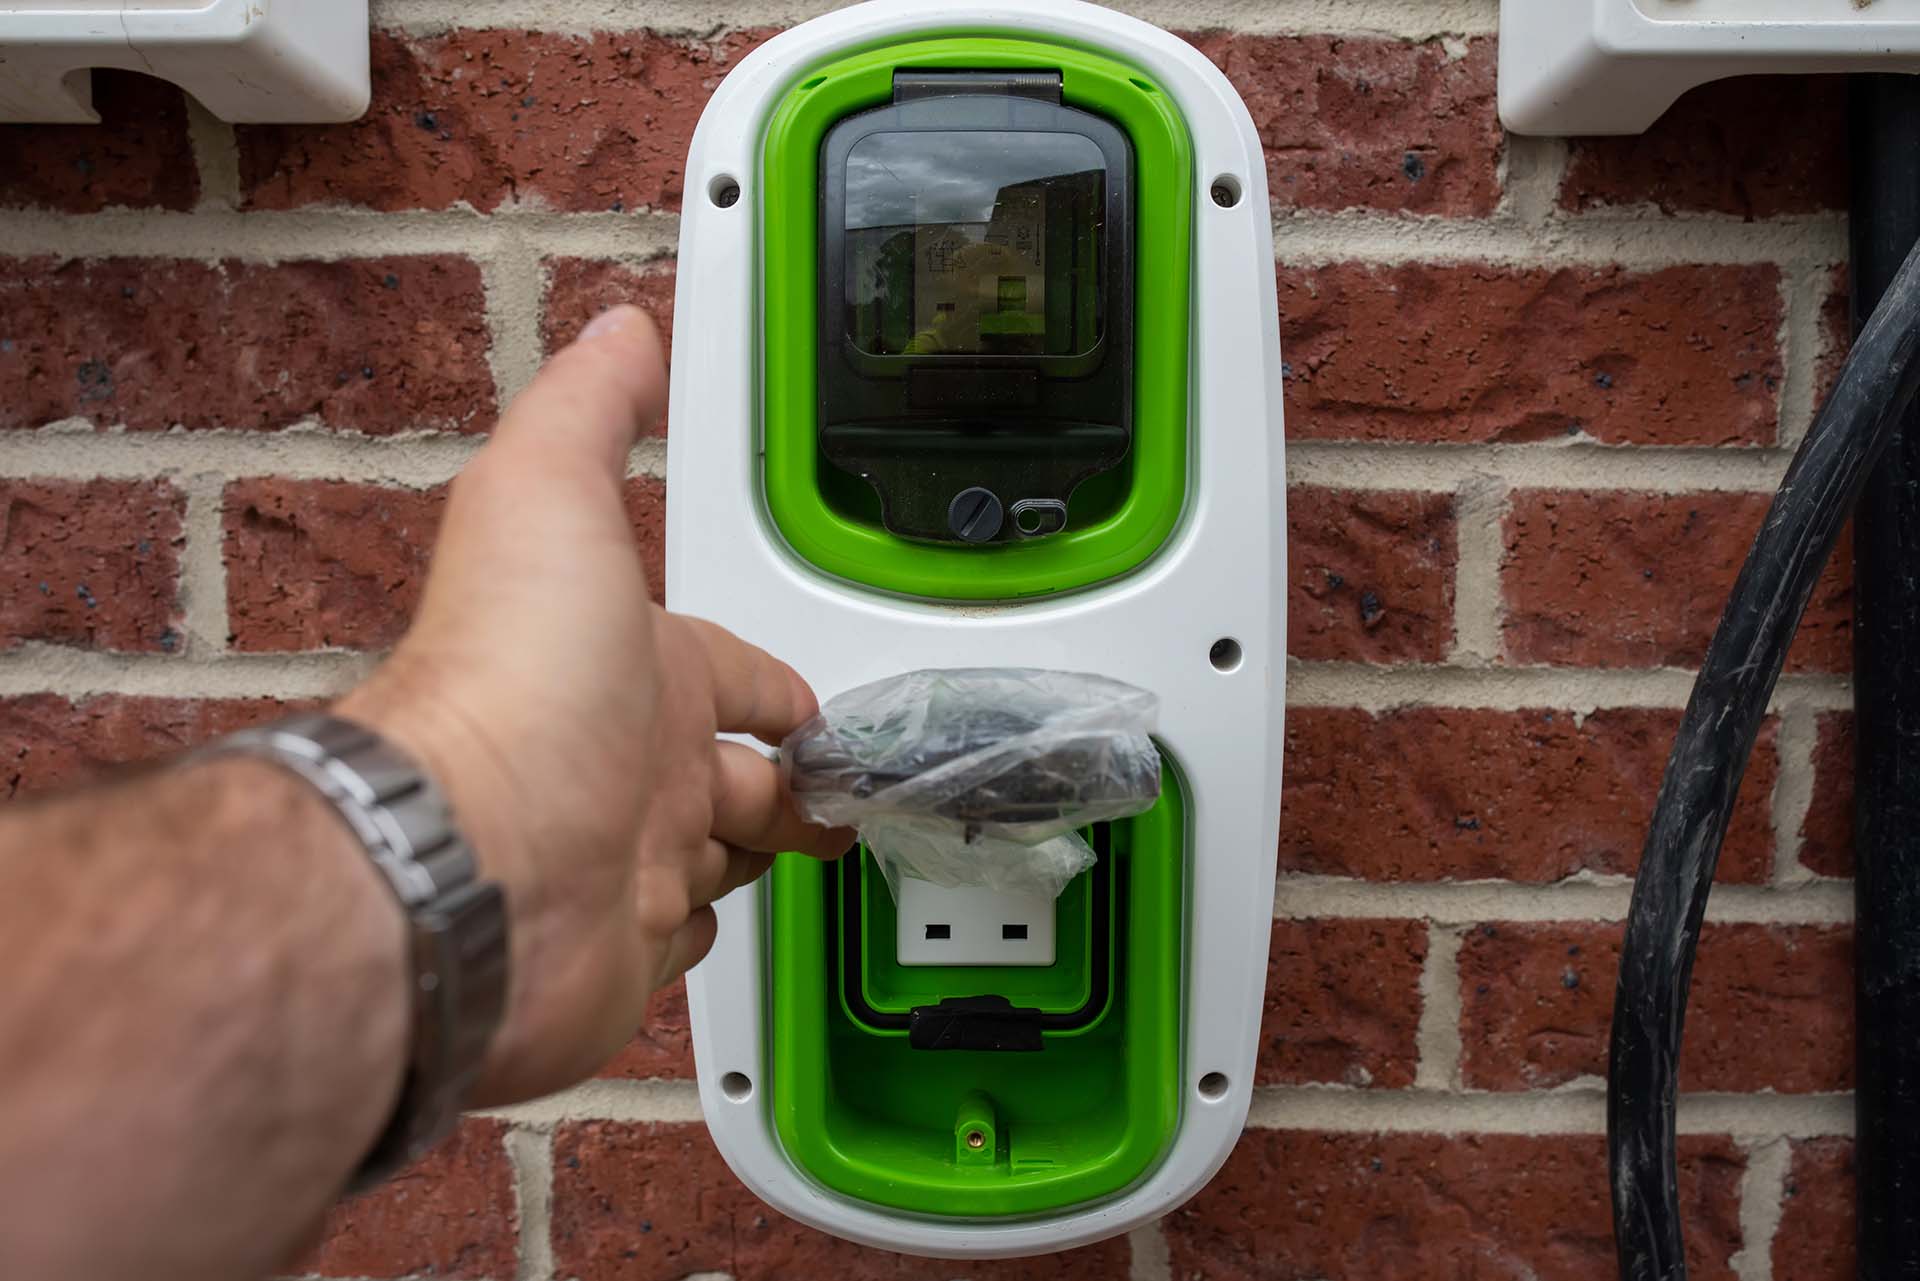 Electric vehicle domestic charging point installed outside of the house on new housing development as part of green energy program to allow recharging vehicle overnight